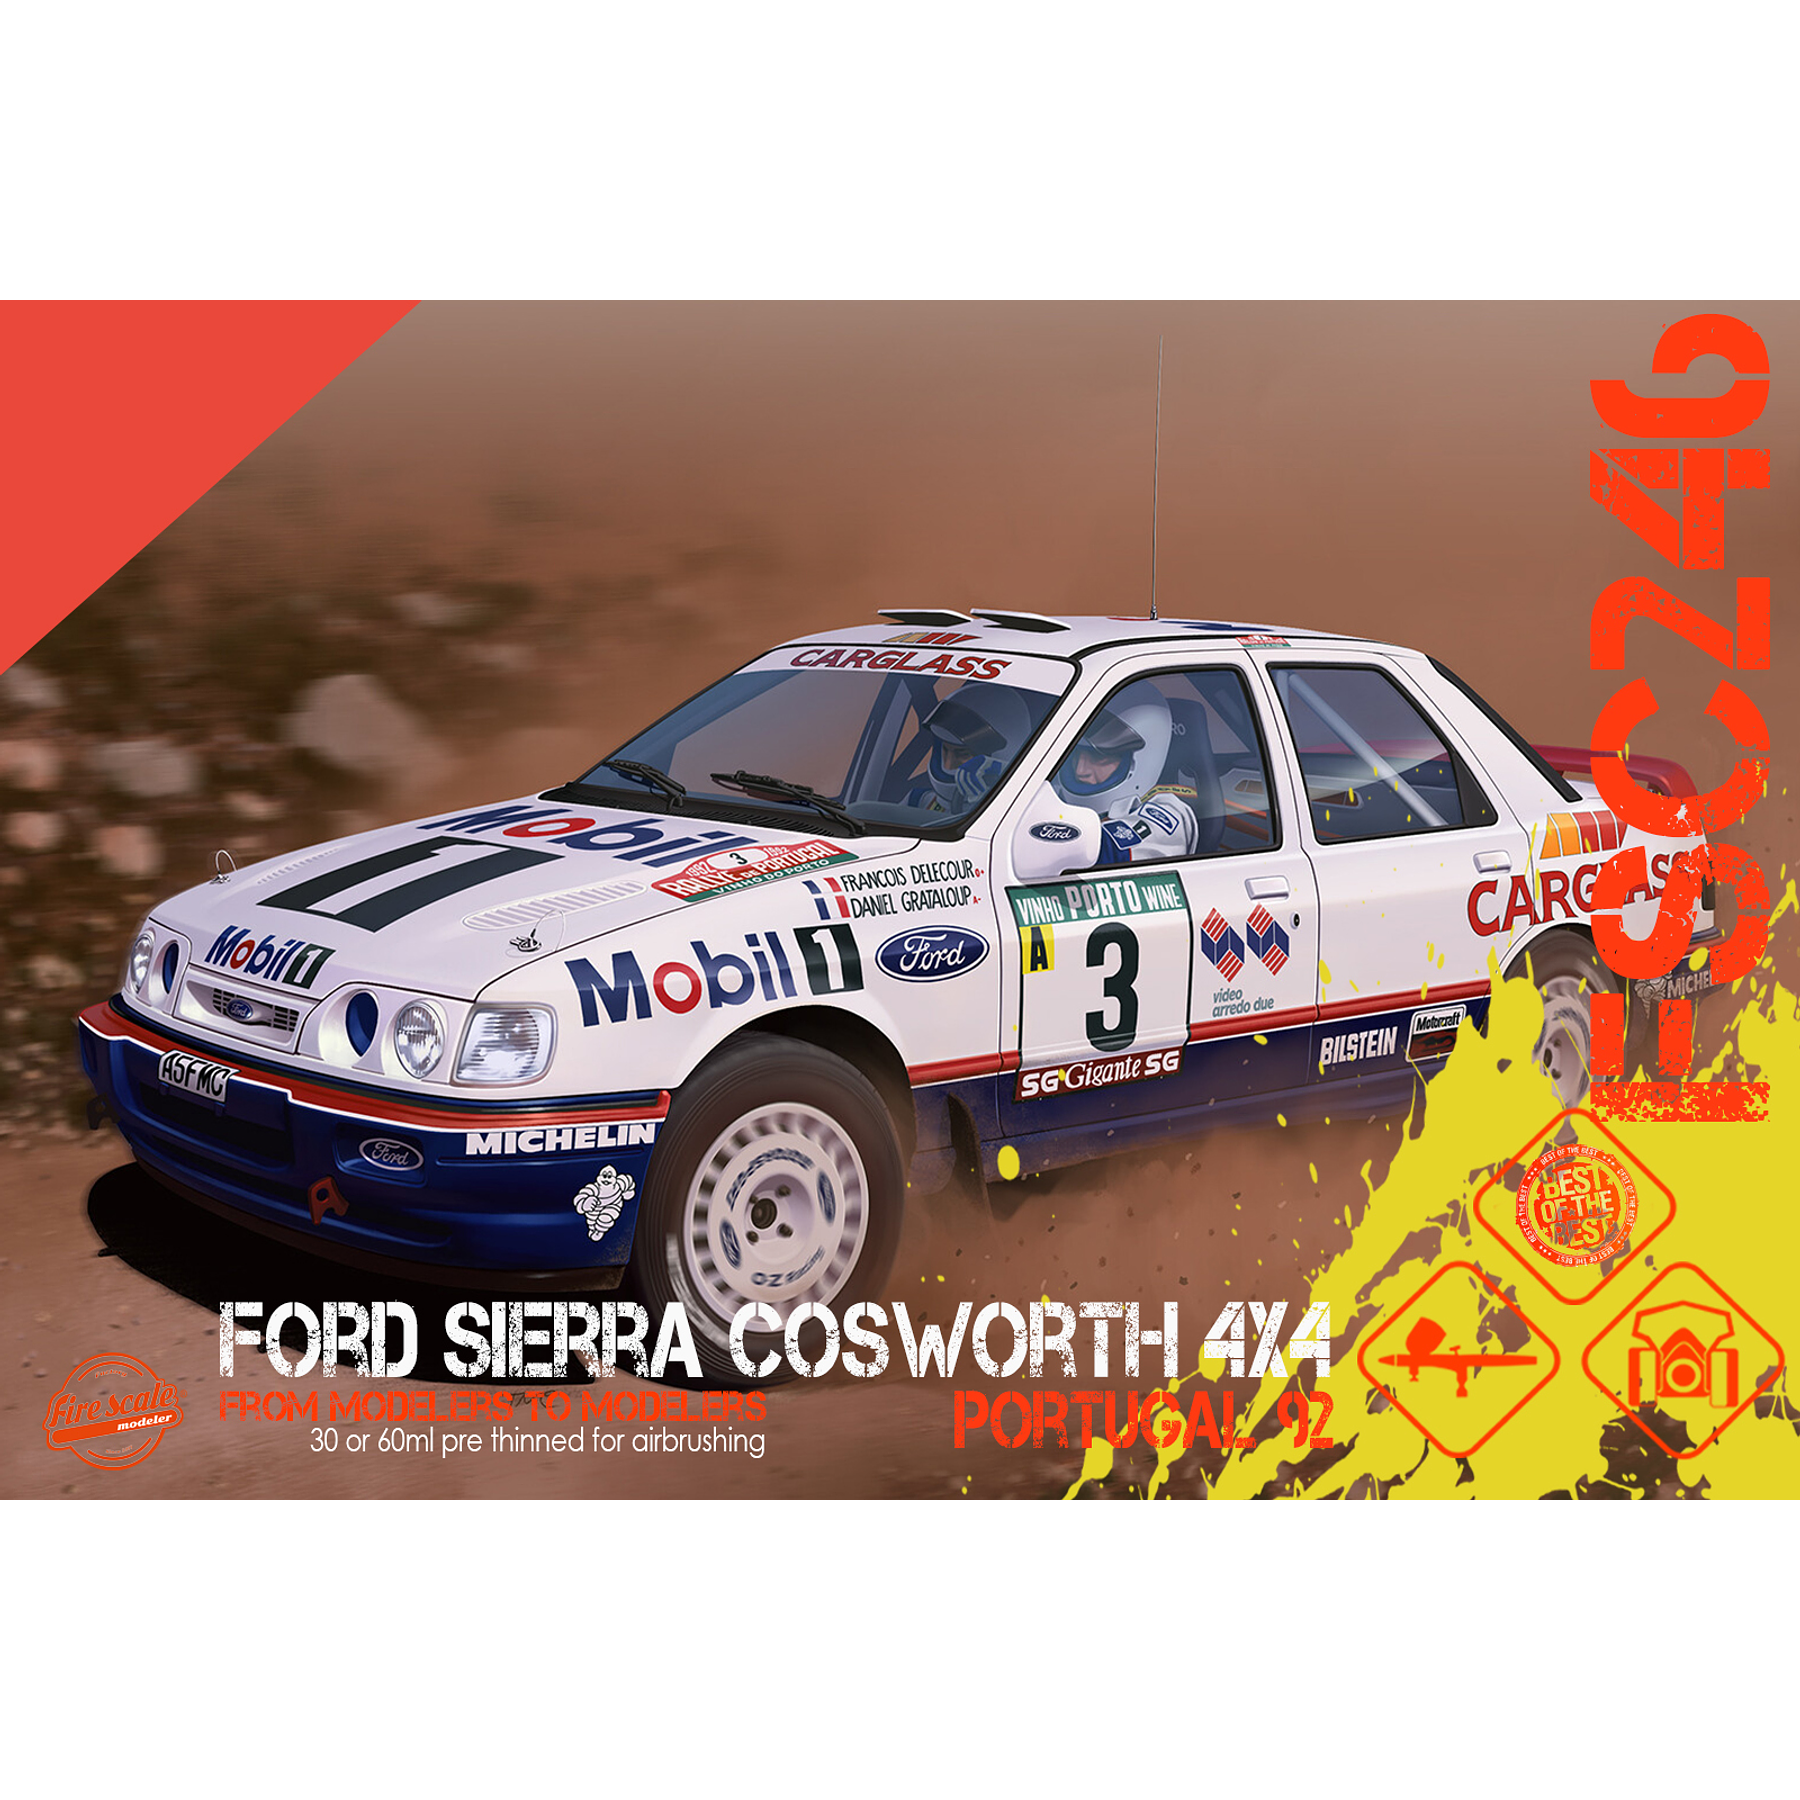 Ford Sierra Cosworth 4x4 Portugal 92 - Red